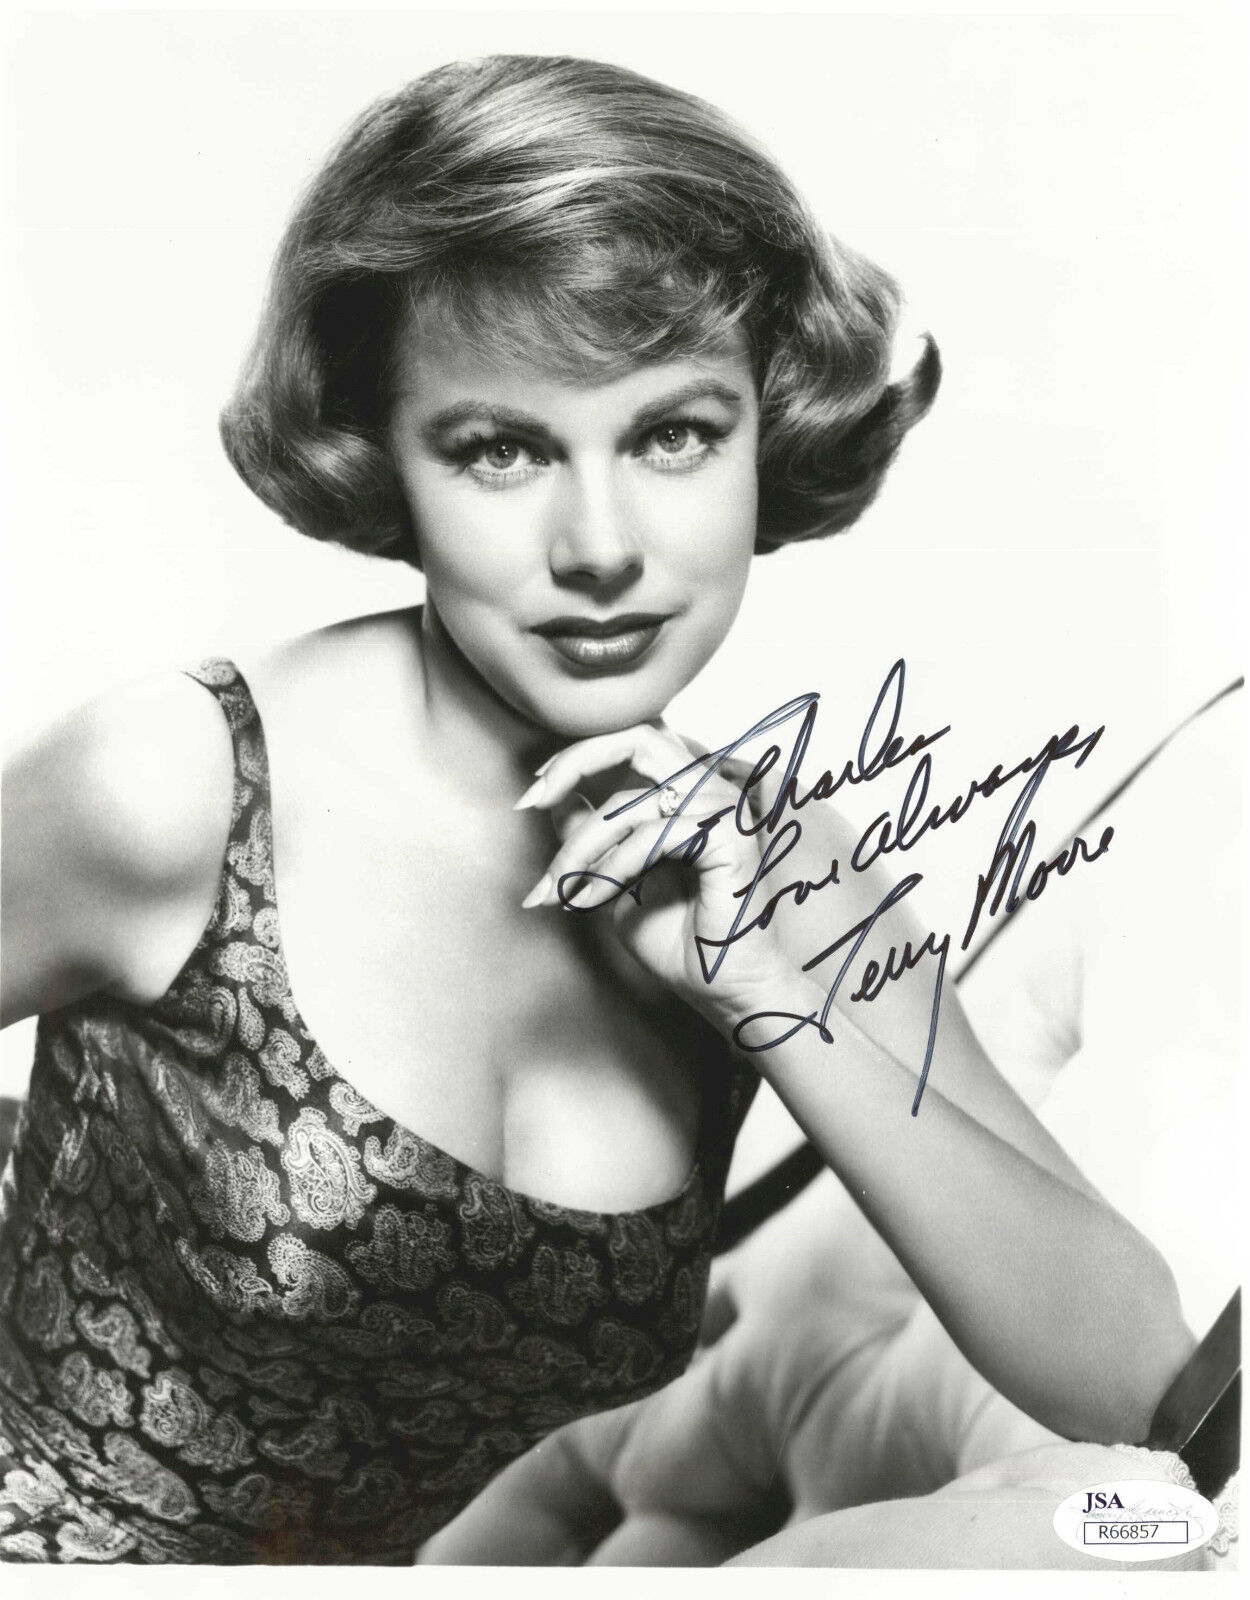 TERRY MOORE, ACTRESS, POSED NUDE IN PLAYBOY SIGNED 8X10 JSA AUTHEN. COA #R66857